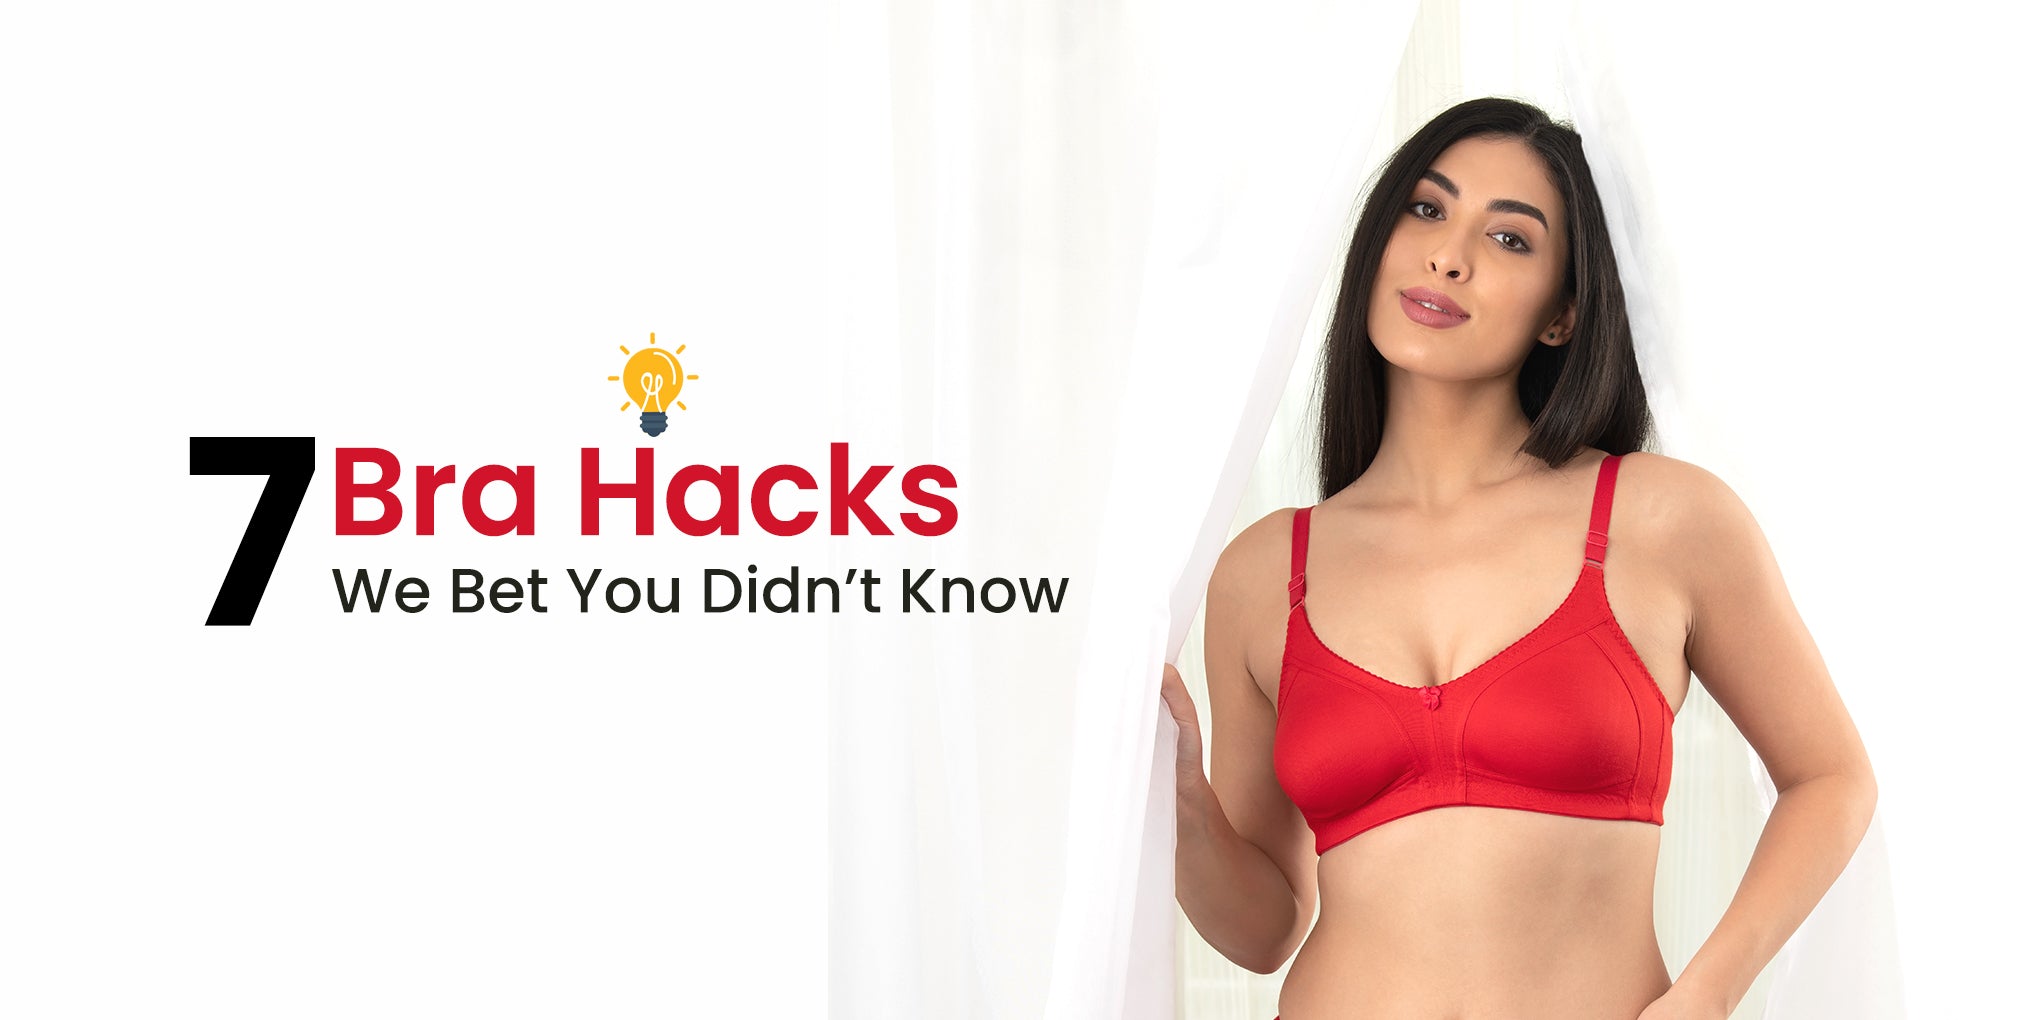 MUST KNOW Bra Hack🙀  A new bra hack to save the day! 😍 More